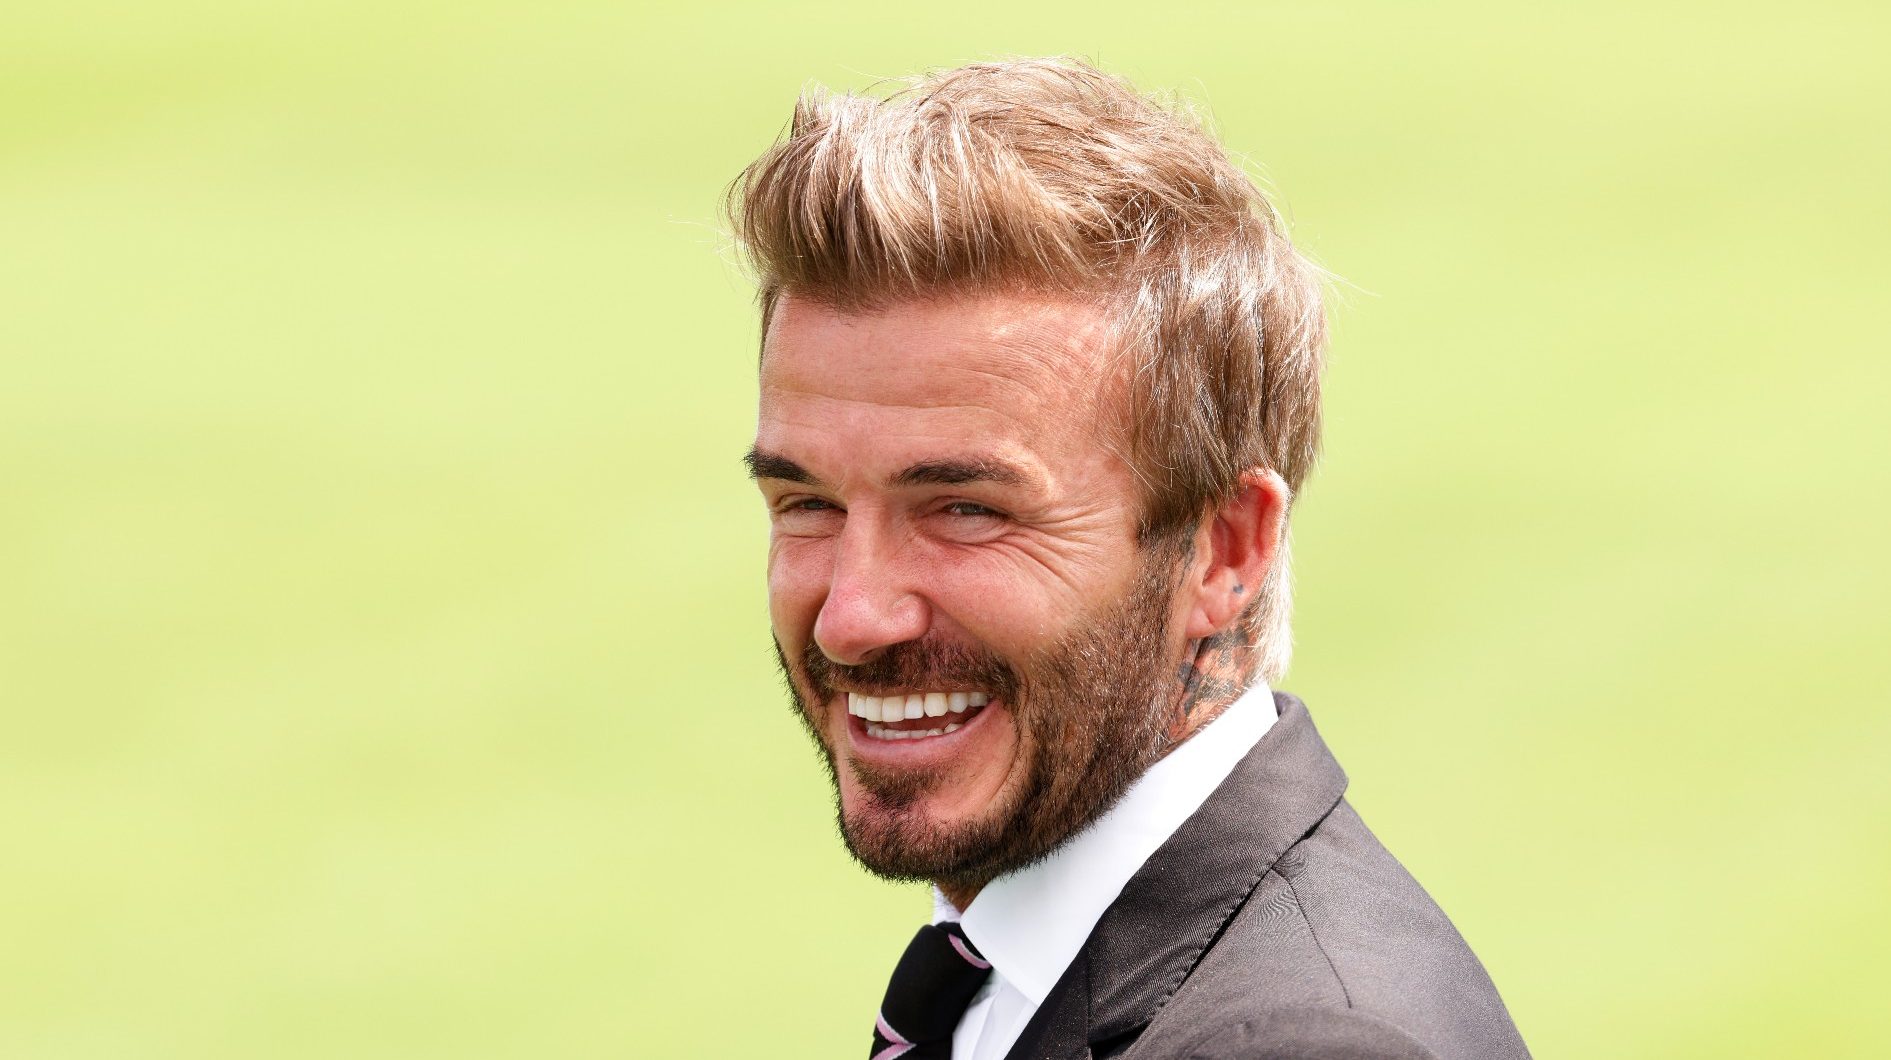 What is David Beckham’s role at Inter Miami?